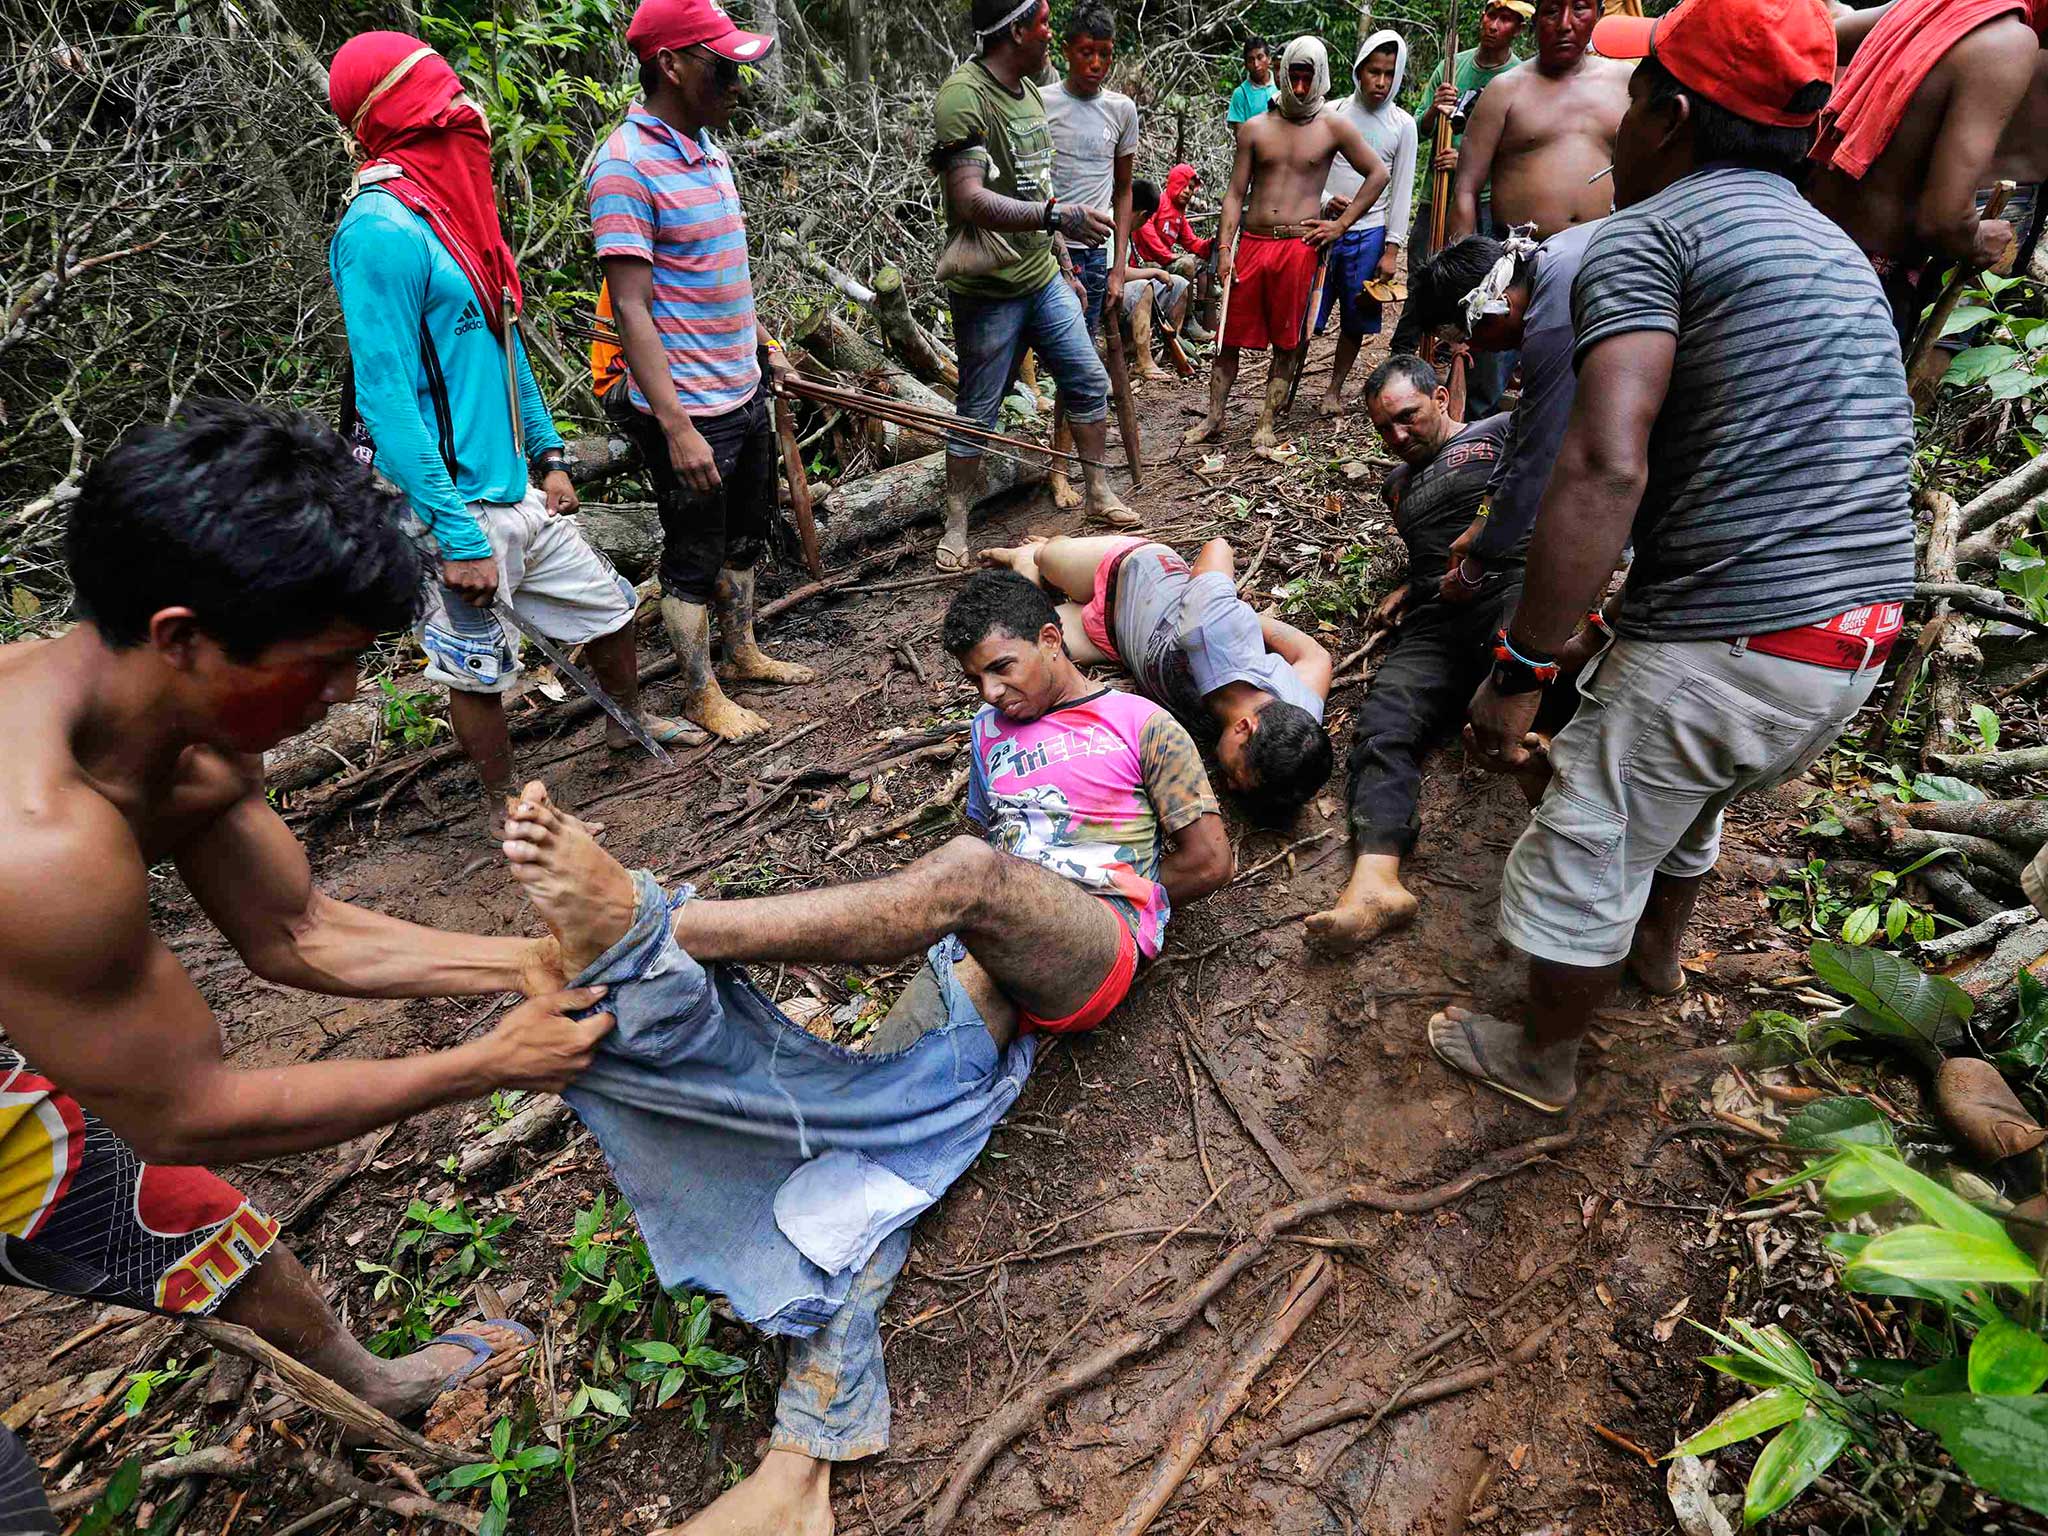 Photographs Show Amazonian Tribe Capturing And Stripping Illegal Rainforest Loggers The